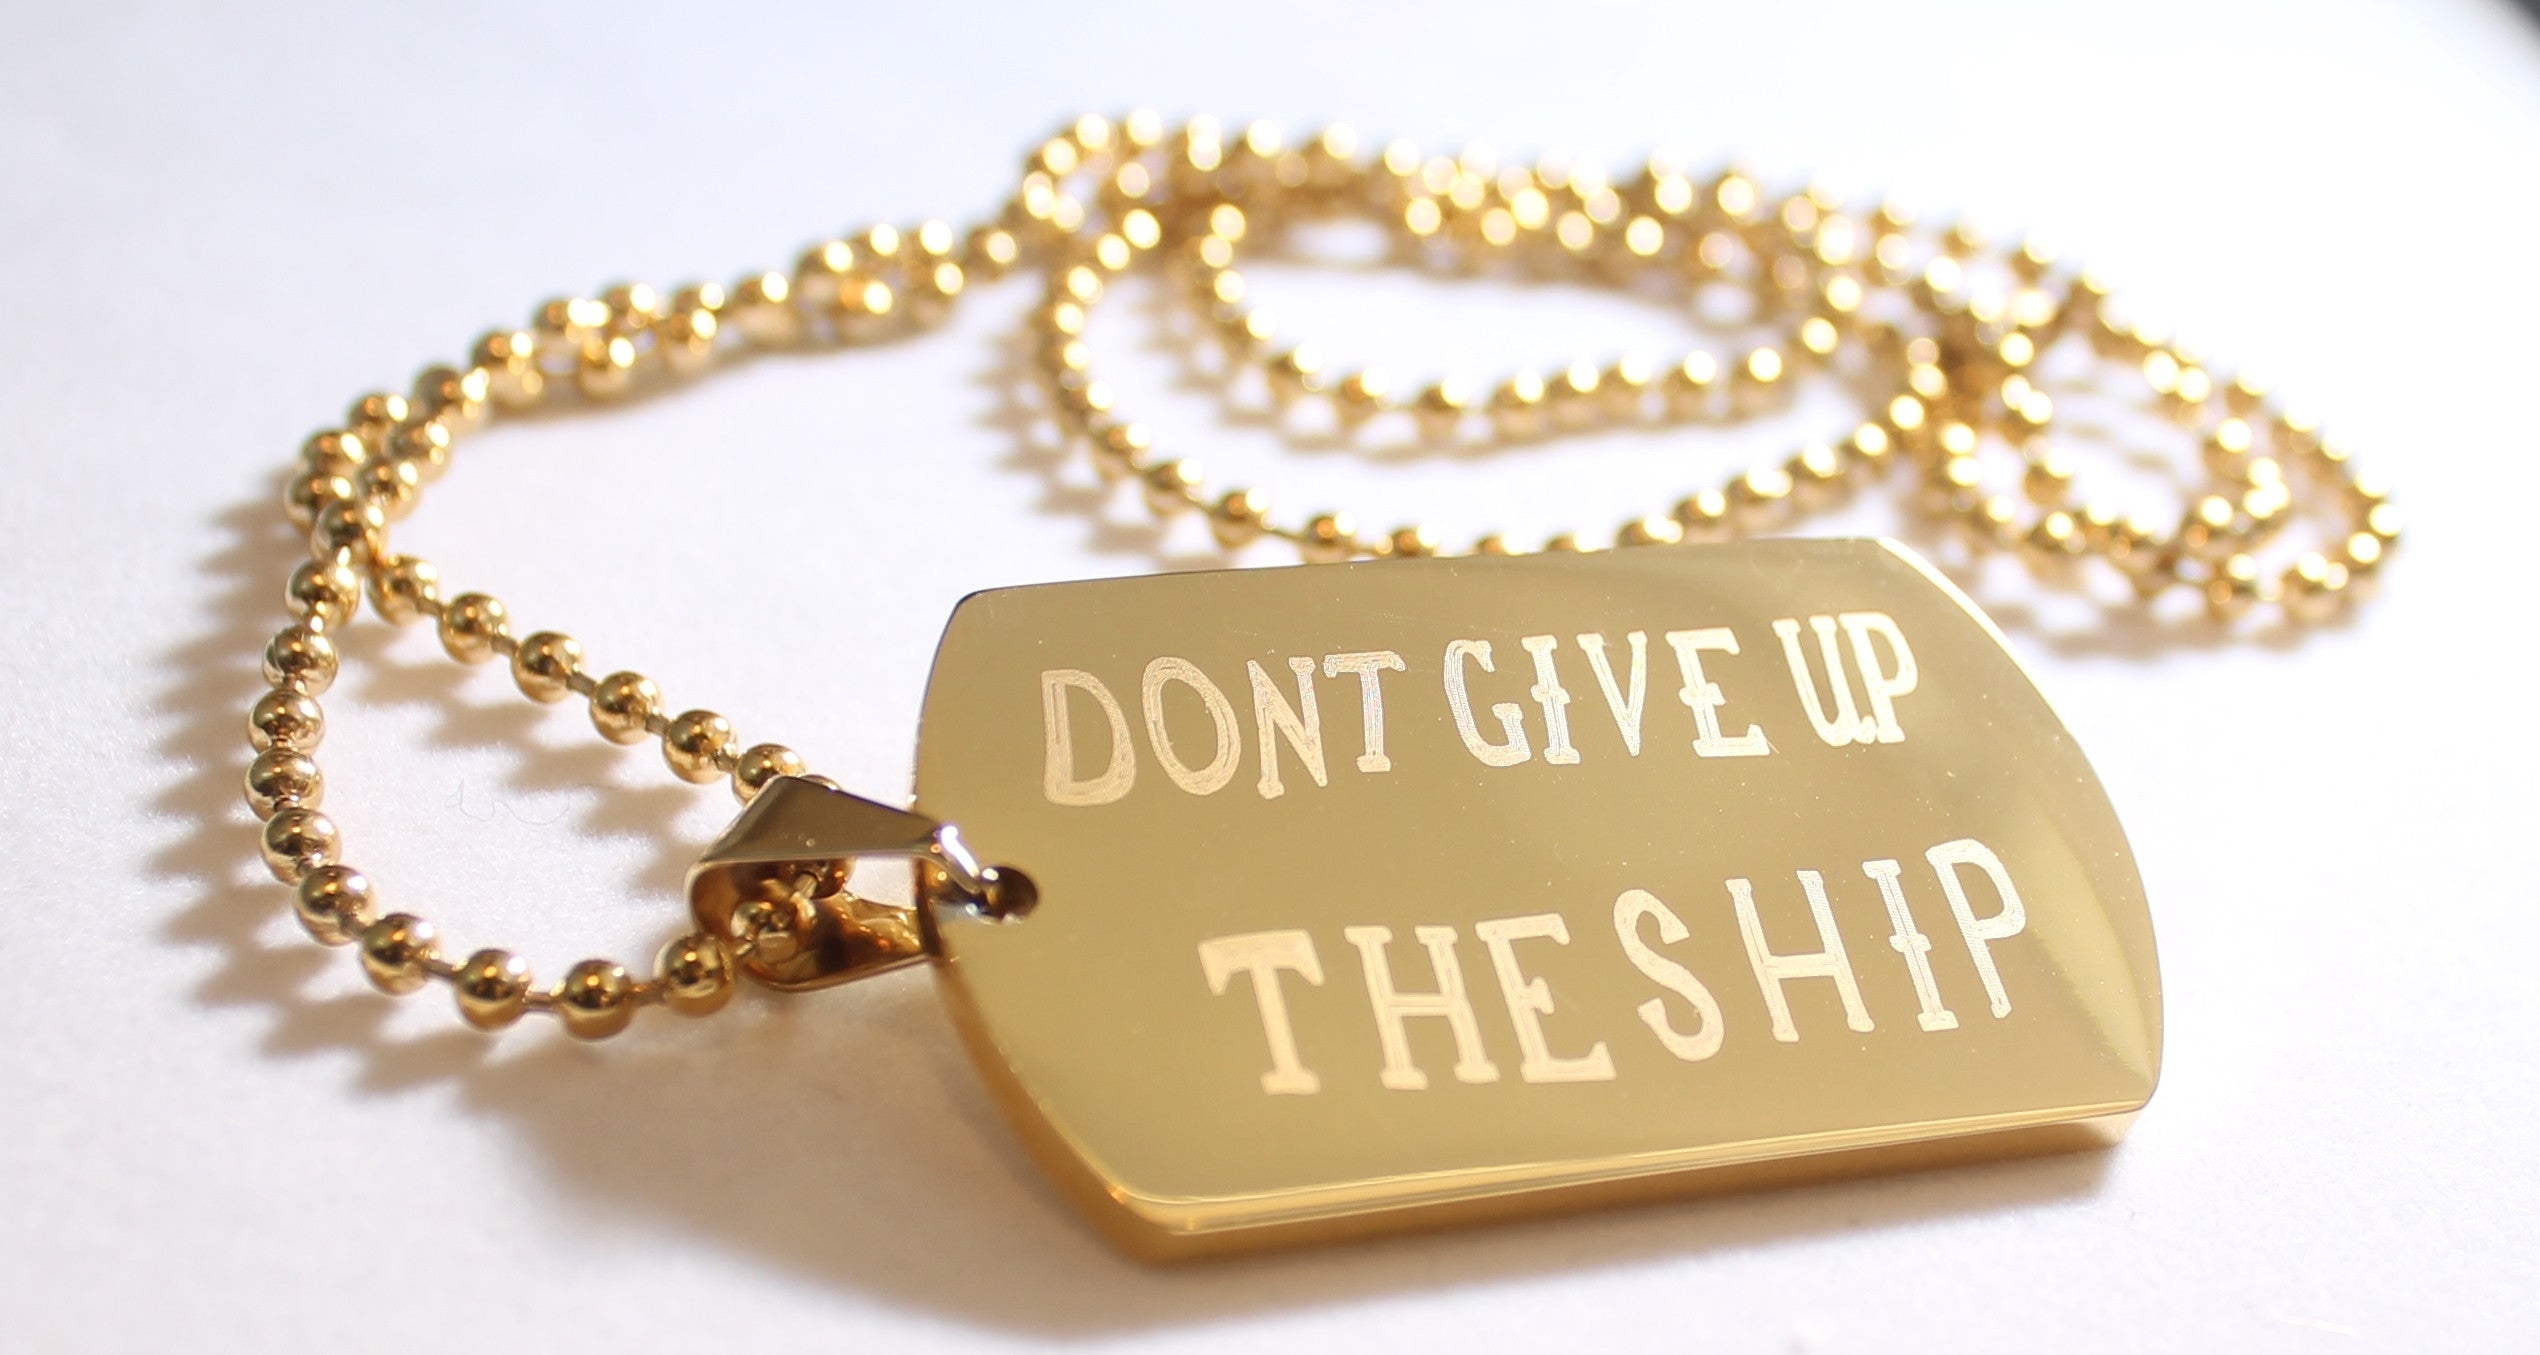 DONT GIVE UP THE SHIP IPG GOLD NAVY MILITARY MOTIVATIONAL THICK STAINLESS STEEL DOG TAG - Samstagsandmore